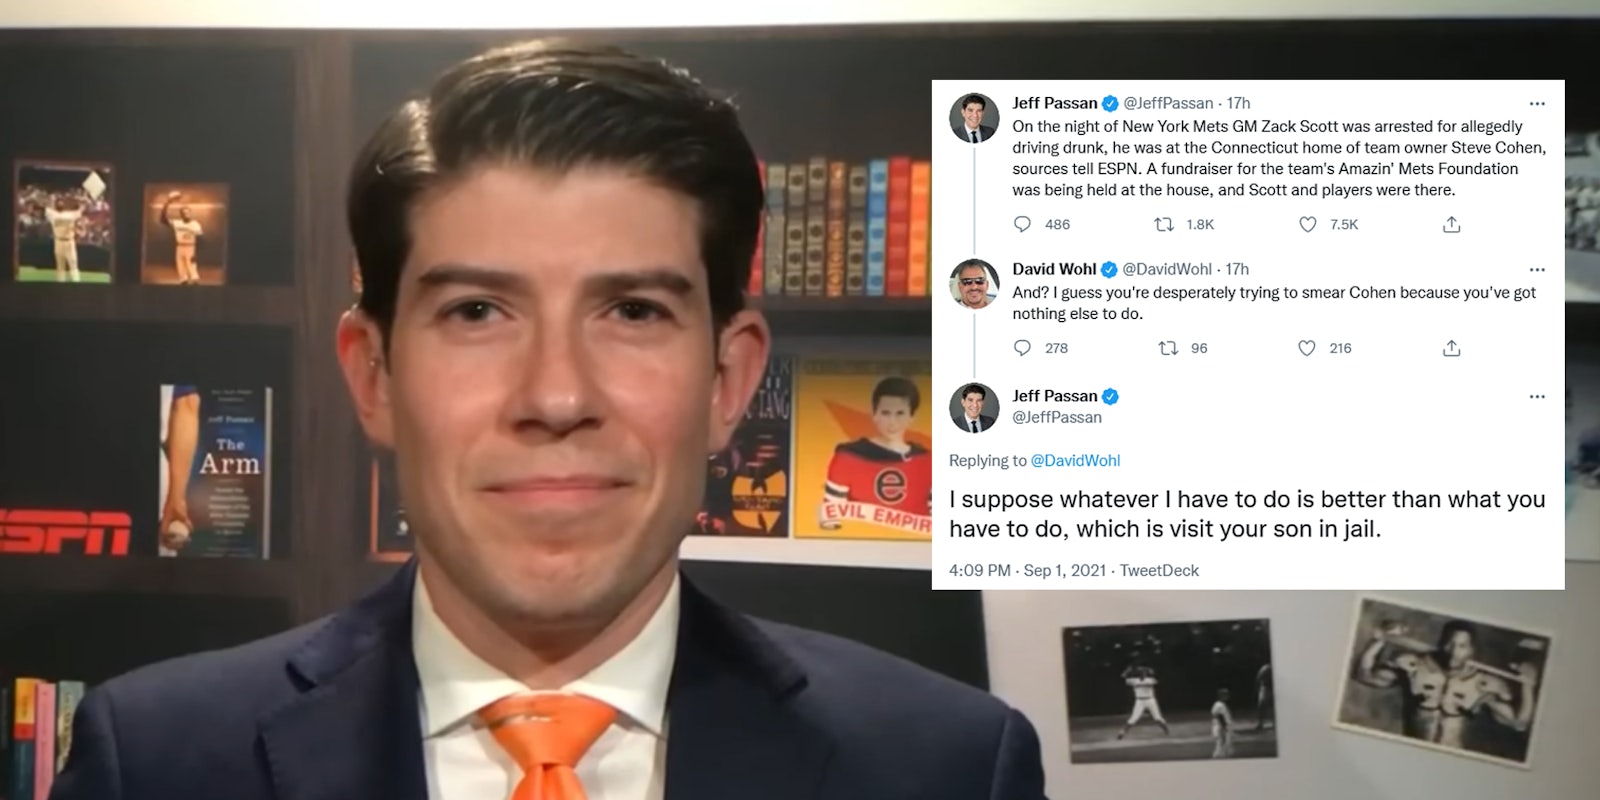 ESPN reporter Jeff Passan next to a screenshot of his Twitter exchange with David Wohl.